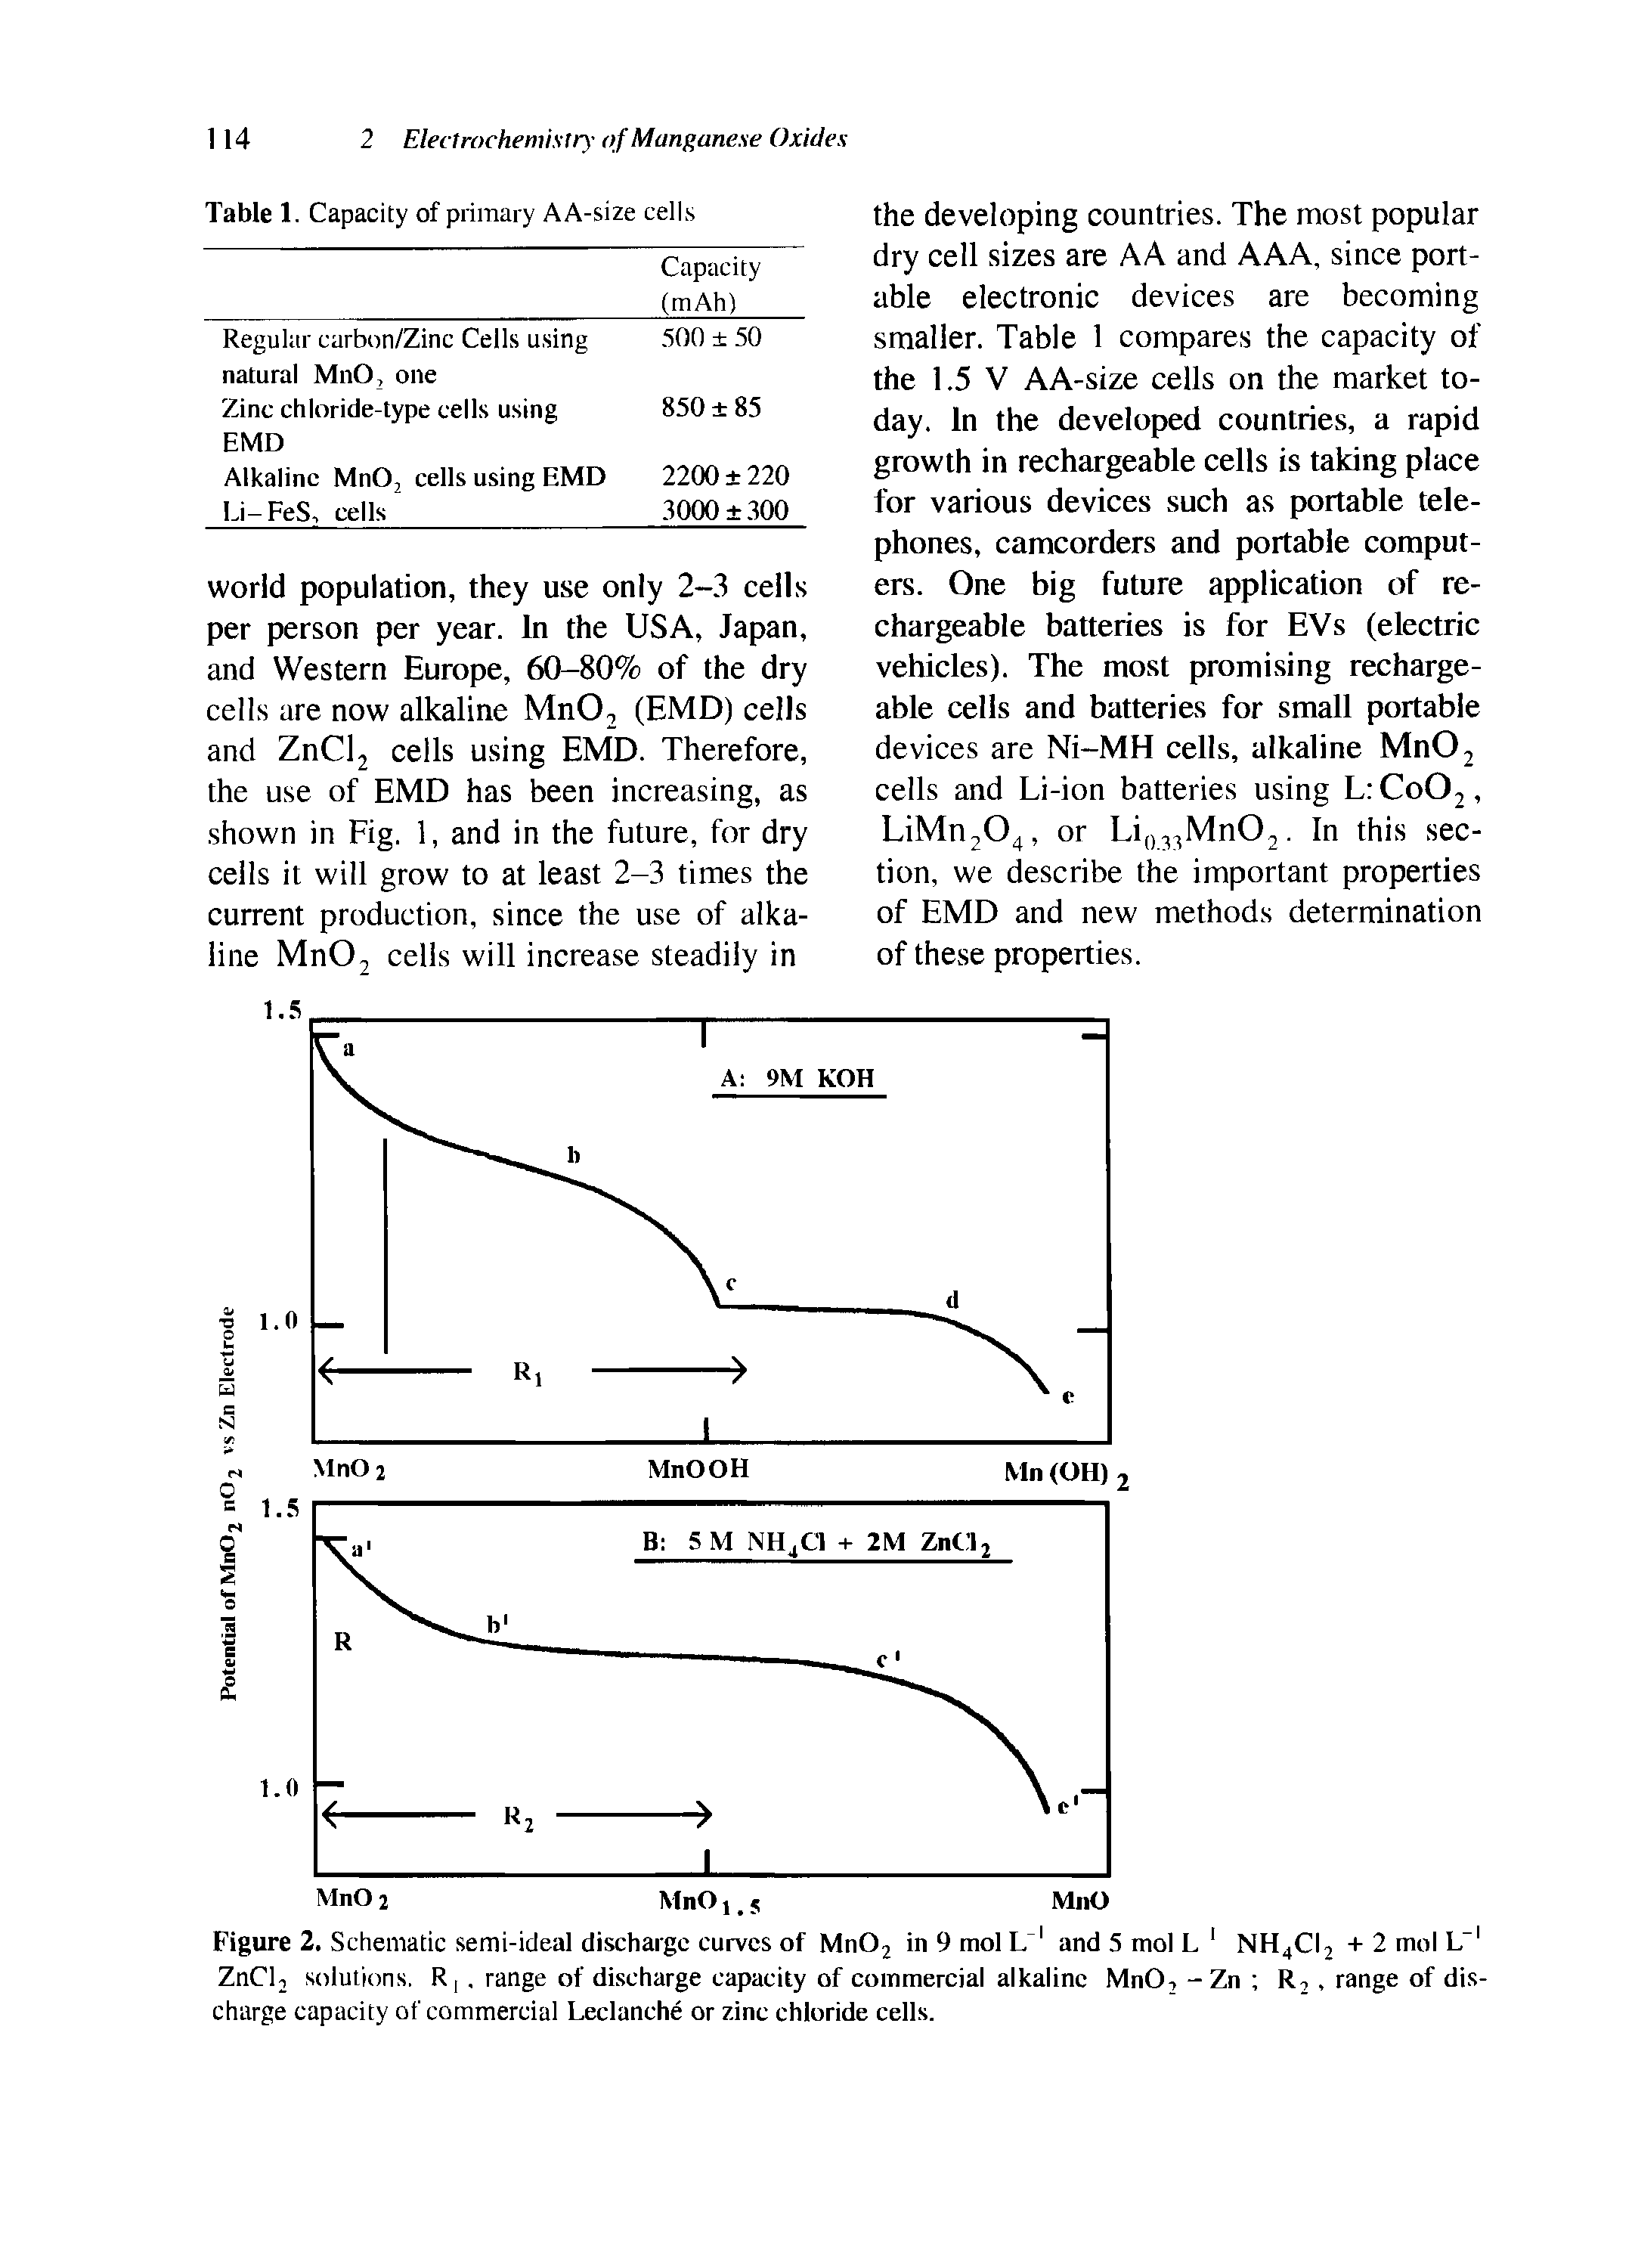 Figure 2. Schematic semi-ideal discharge curves of Mn02 in 9 mol L 1 and 5 mol L 1 NH4CI2 + 2 mol L l ZnCl2 solutions. IL, range of discharge capacity of commercial alkaline MnO, - Zn R2, range of discharge capacity of commercial Leclanche or zinc chloride cells.